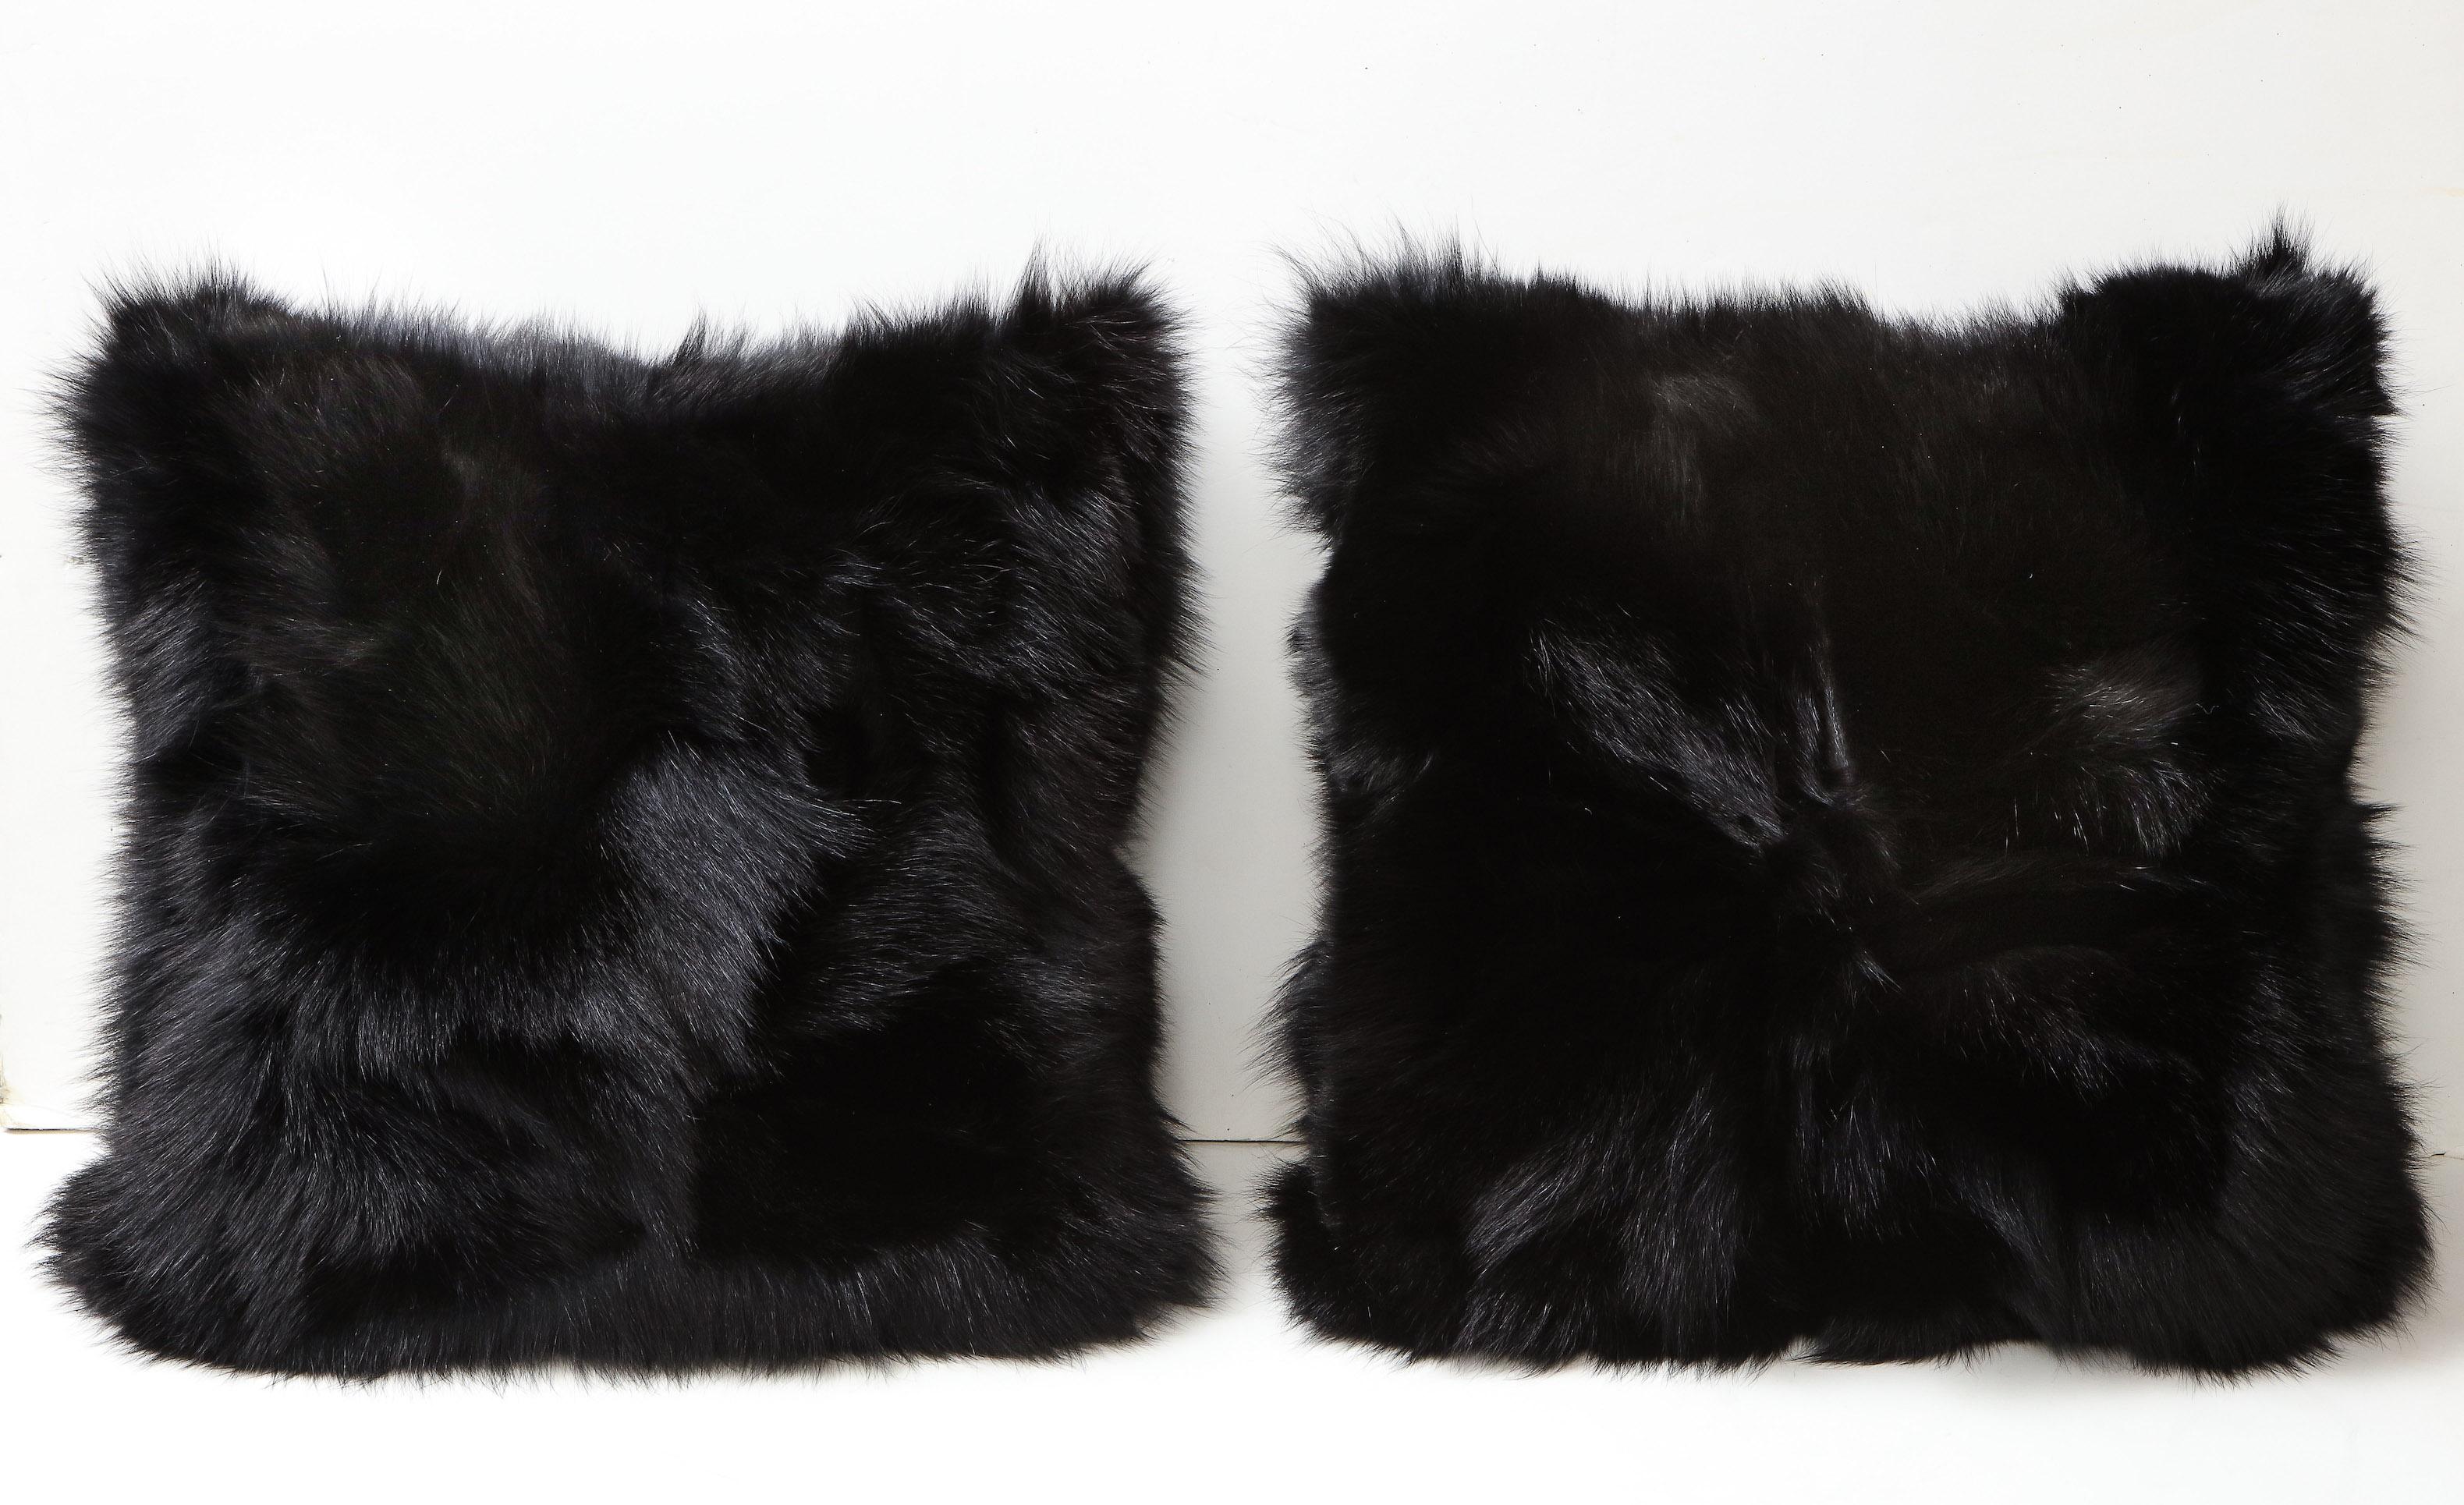 Fur Custom Double Sided Toscana Shearling Pillow in Black Color For Sale